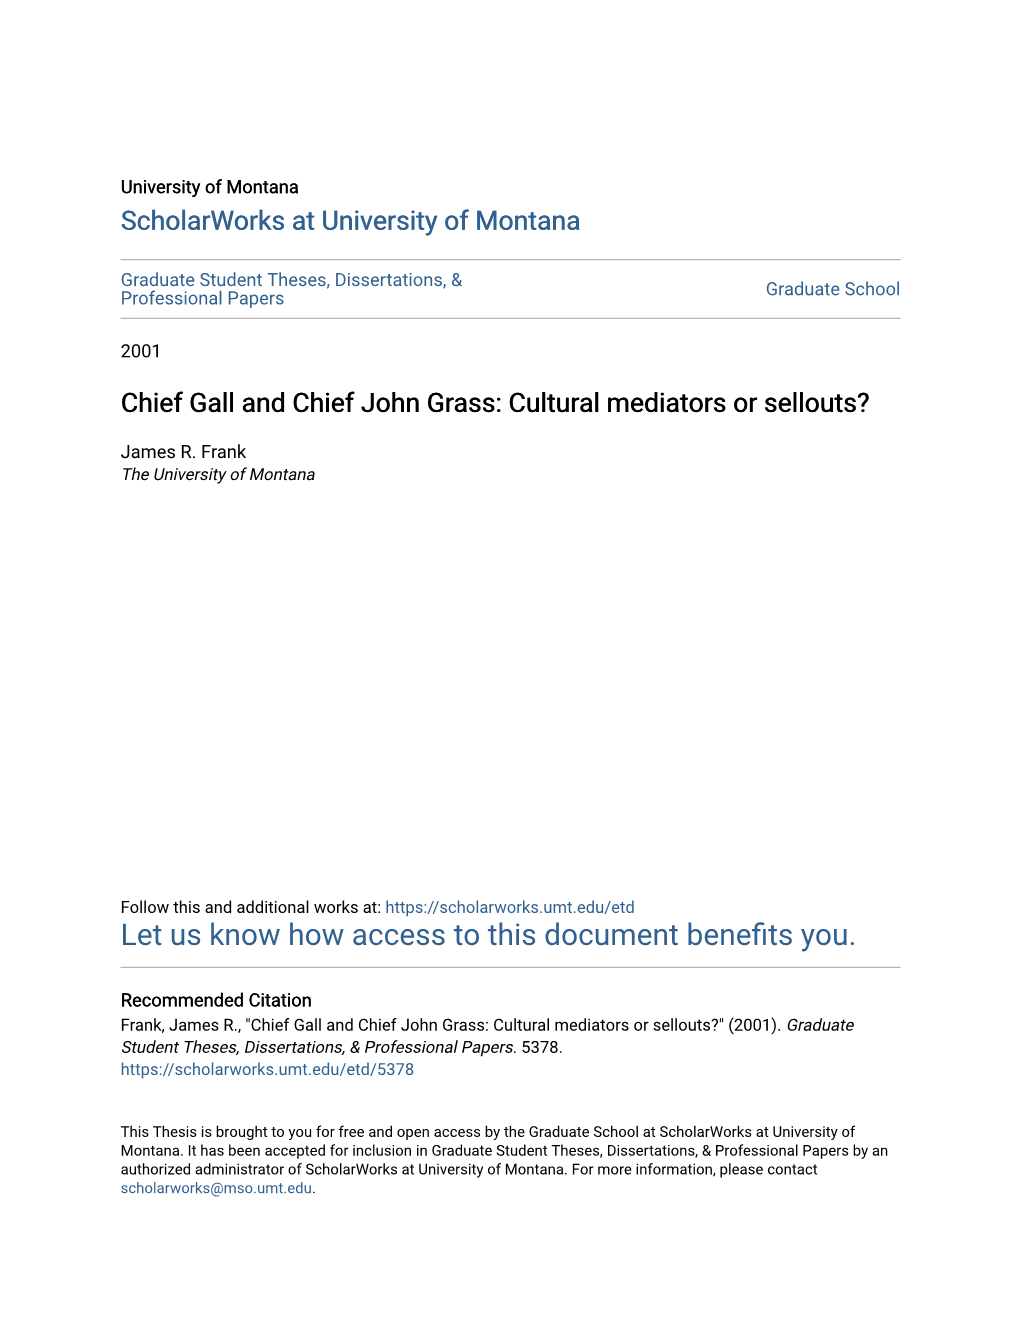 Chief Gall and Chief John Grass: Cultural Mediators Or Sellouts?